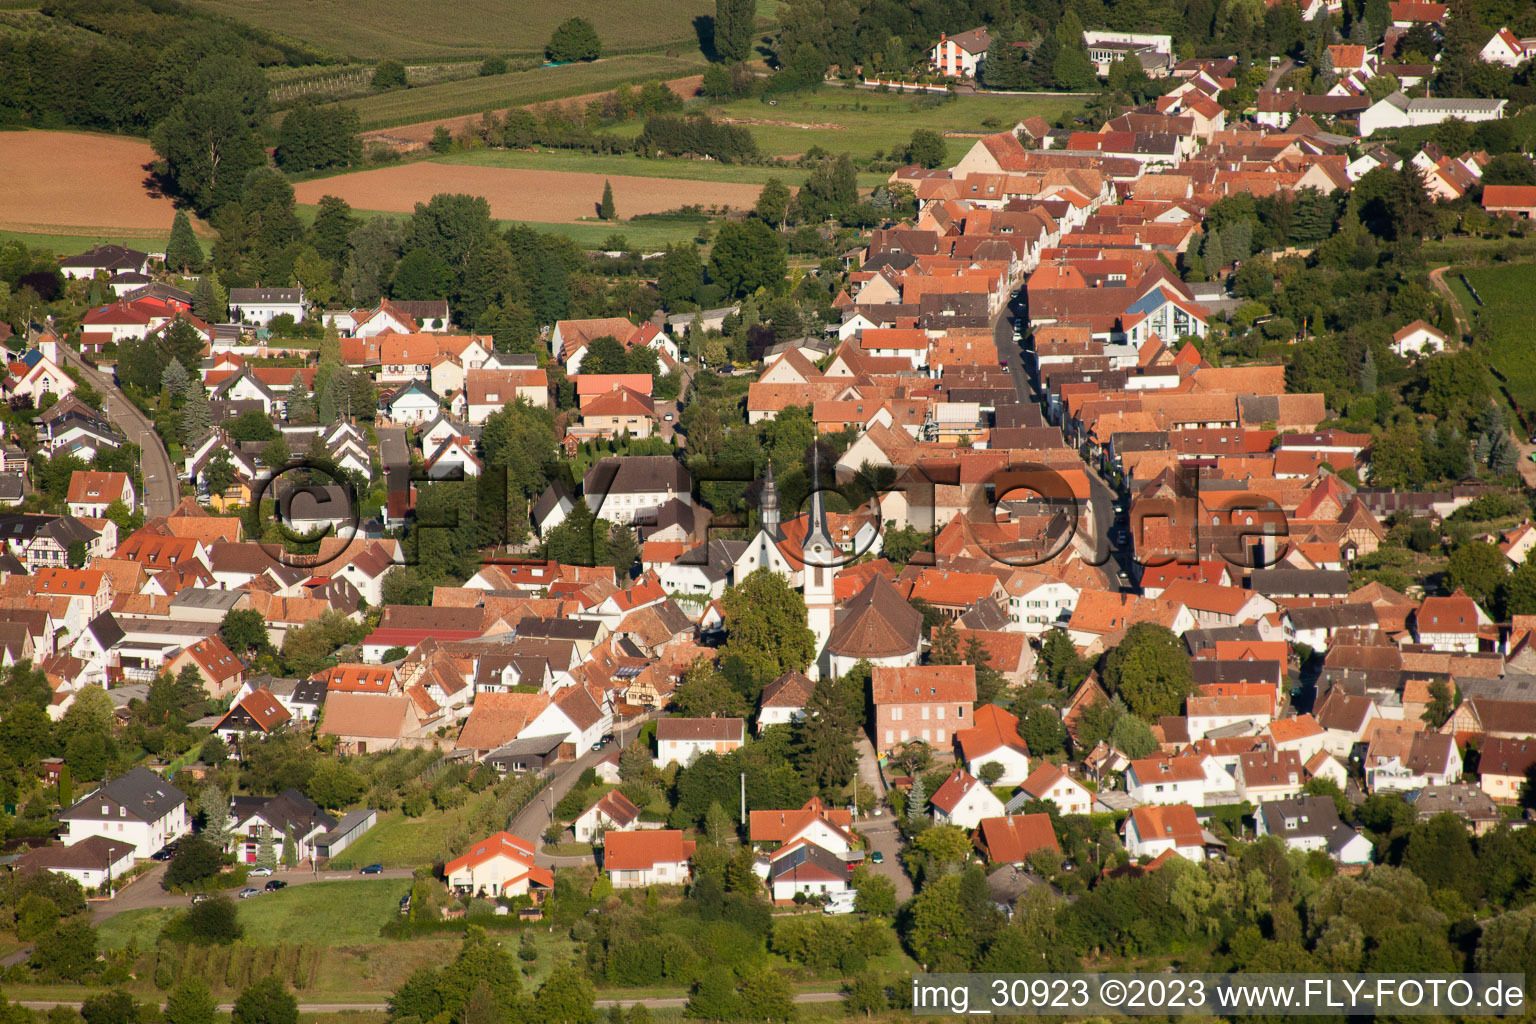 Drone image of Göcklingen in the state Rhineland-Palatinate, Germany